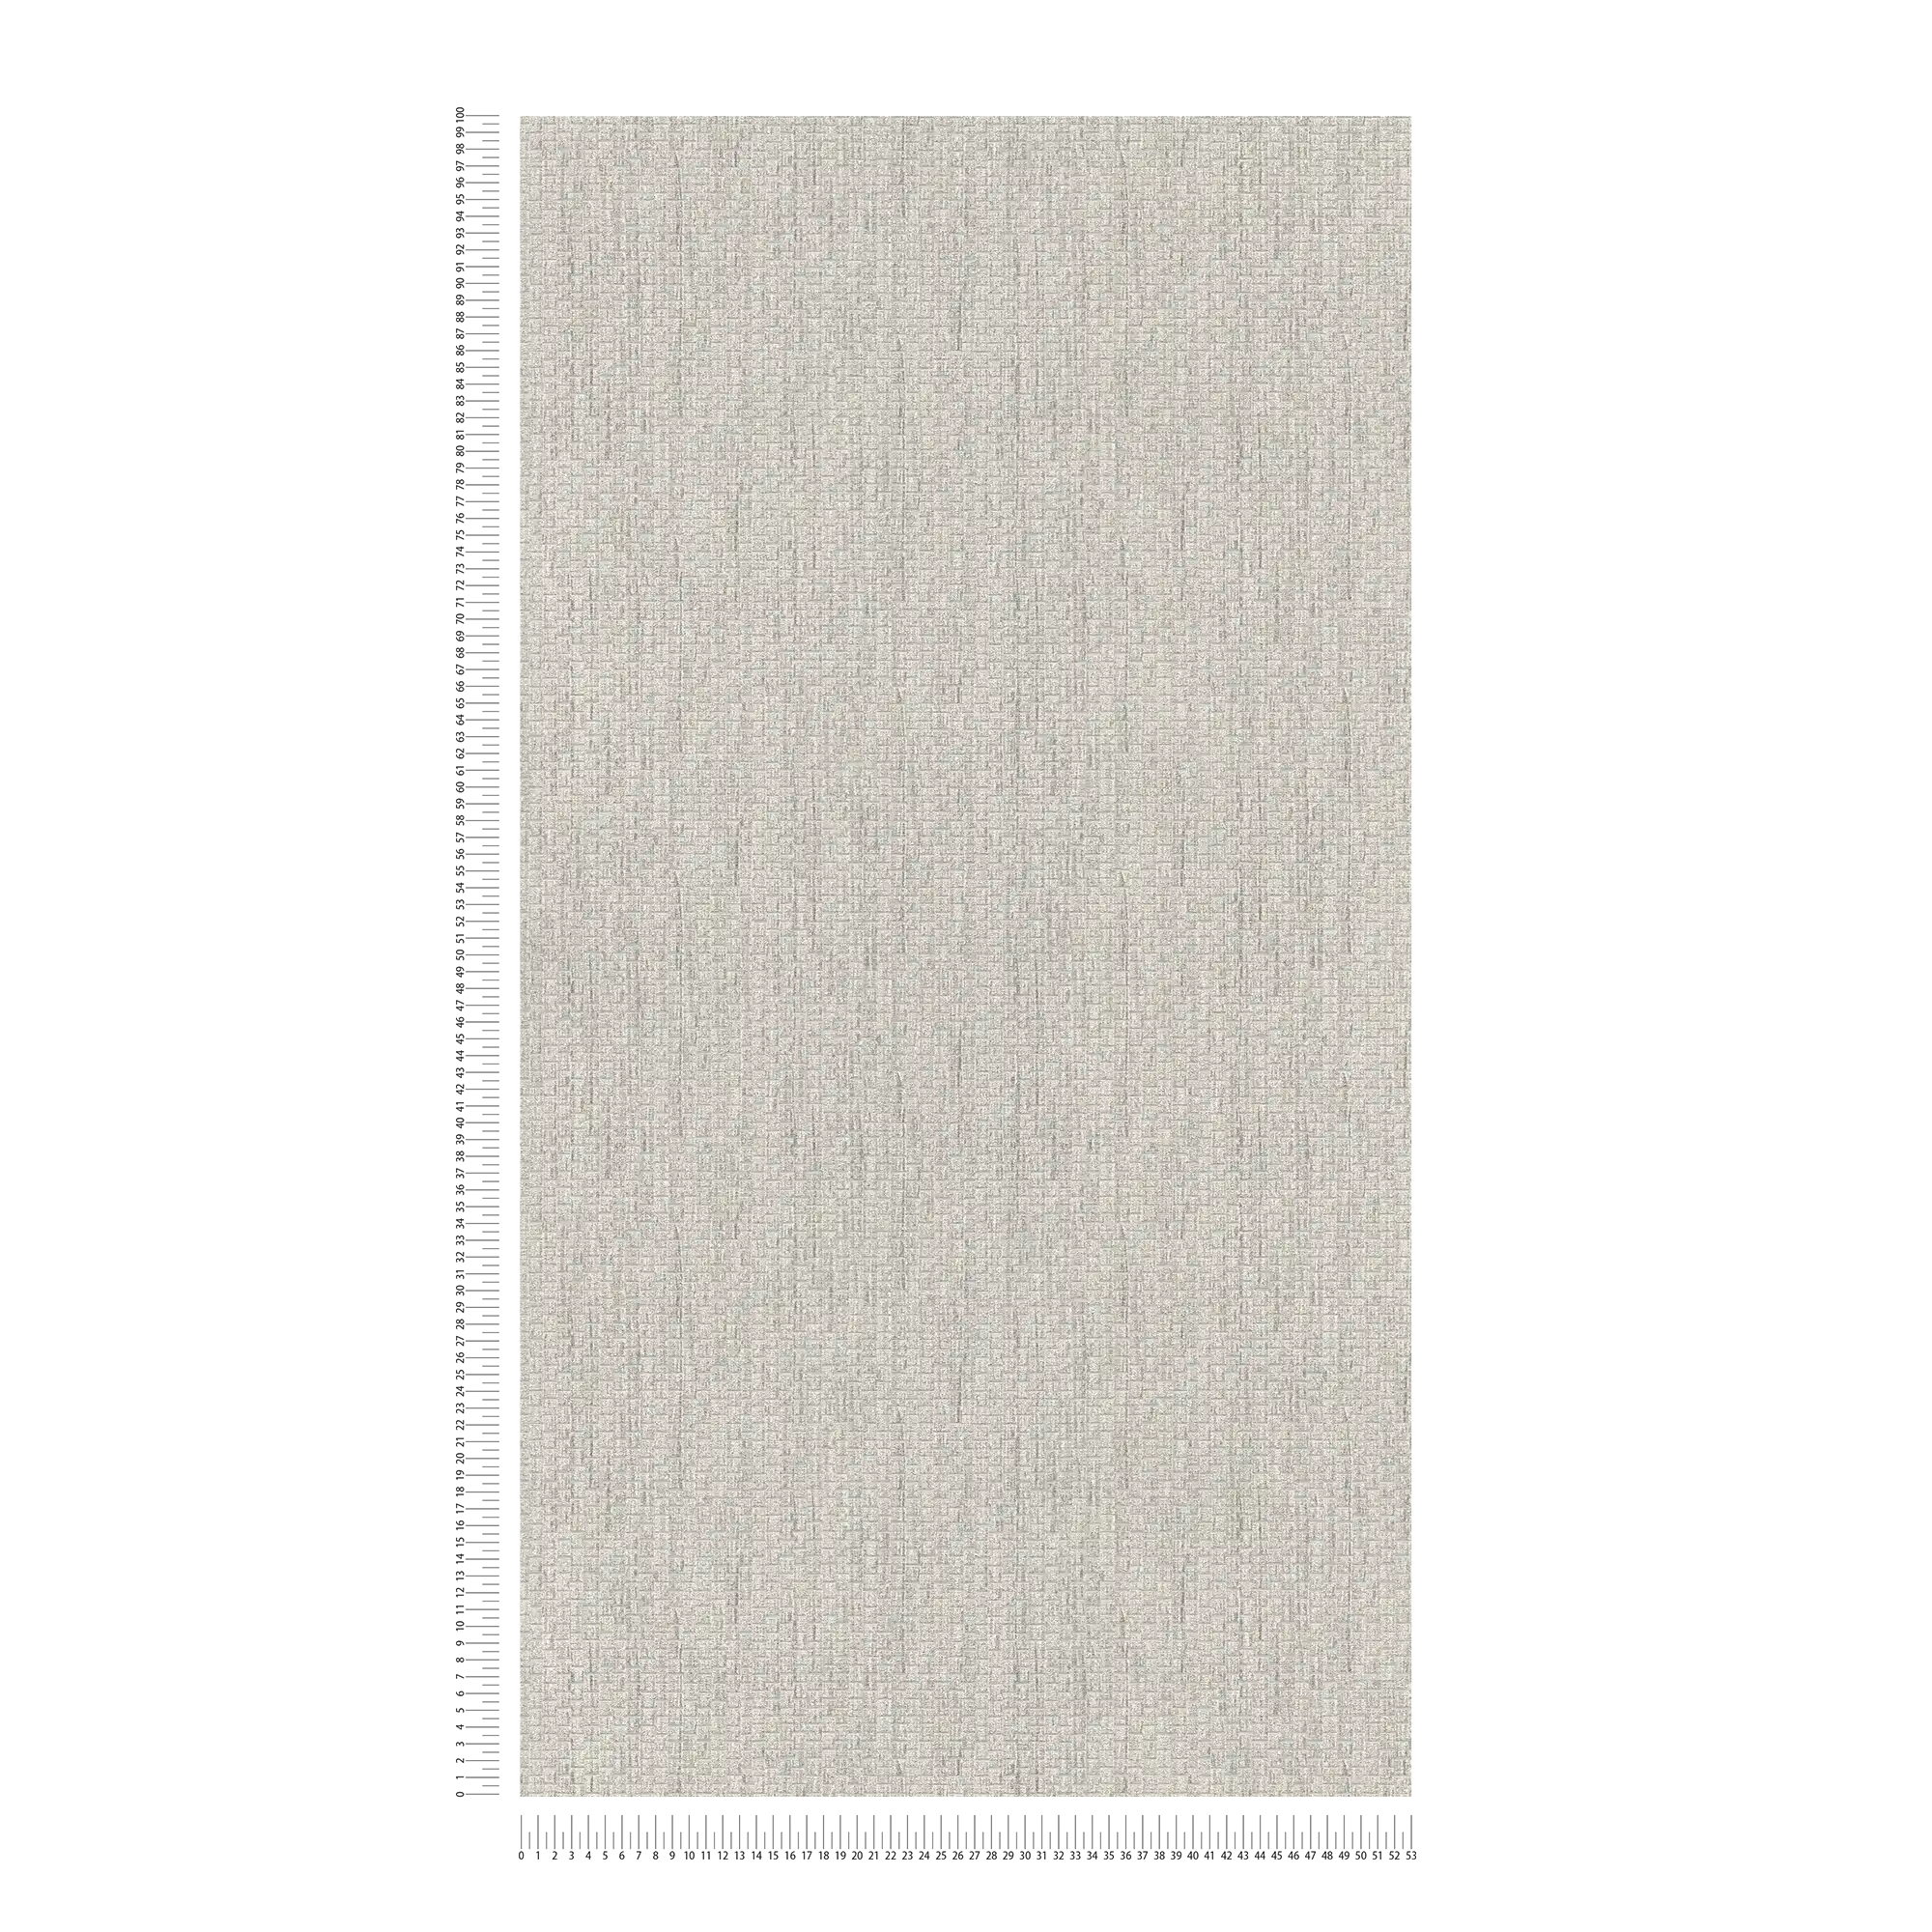             Wallpaper with raffia natural fabric pattern - grey
        